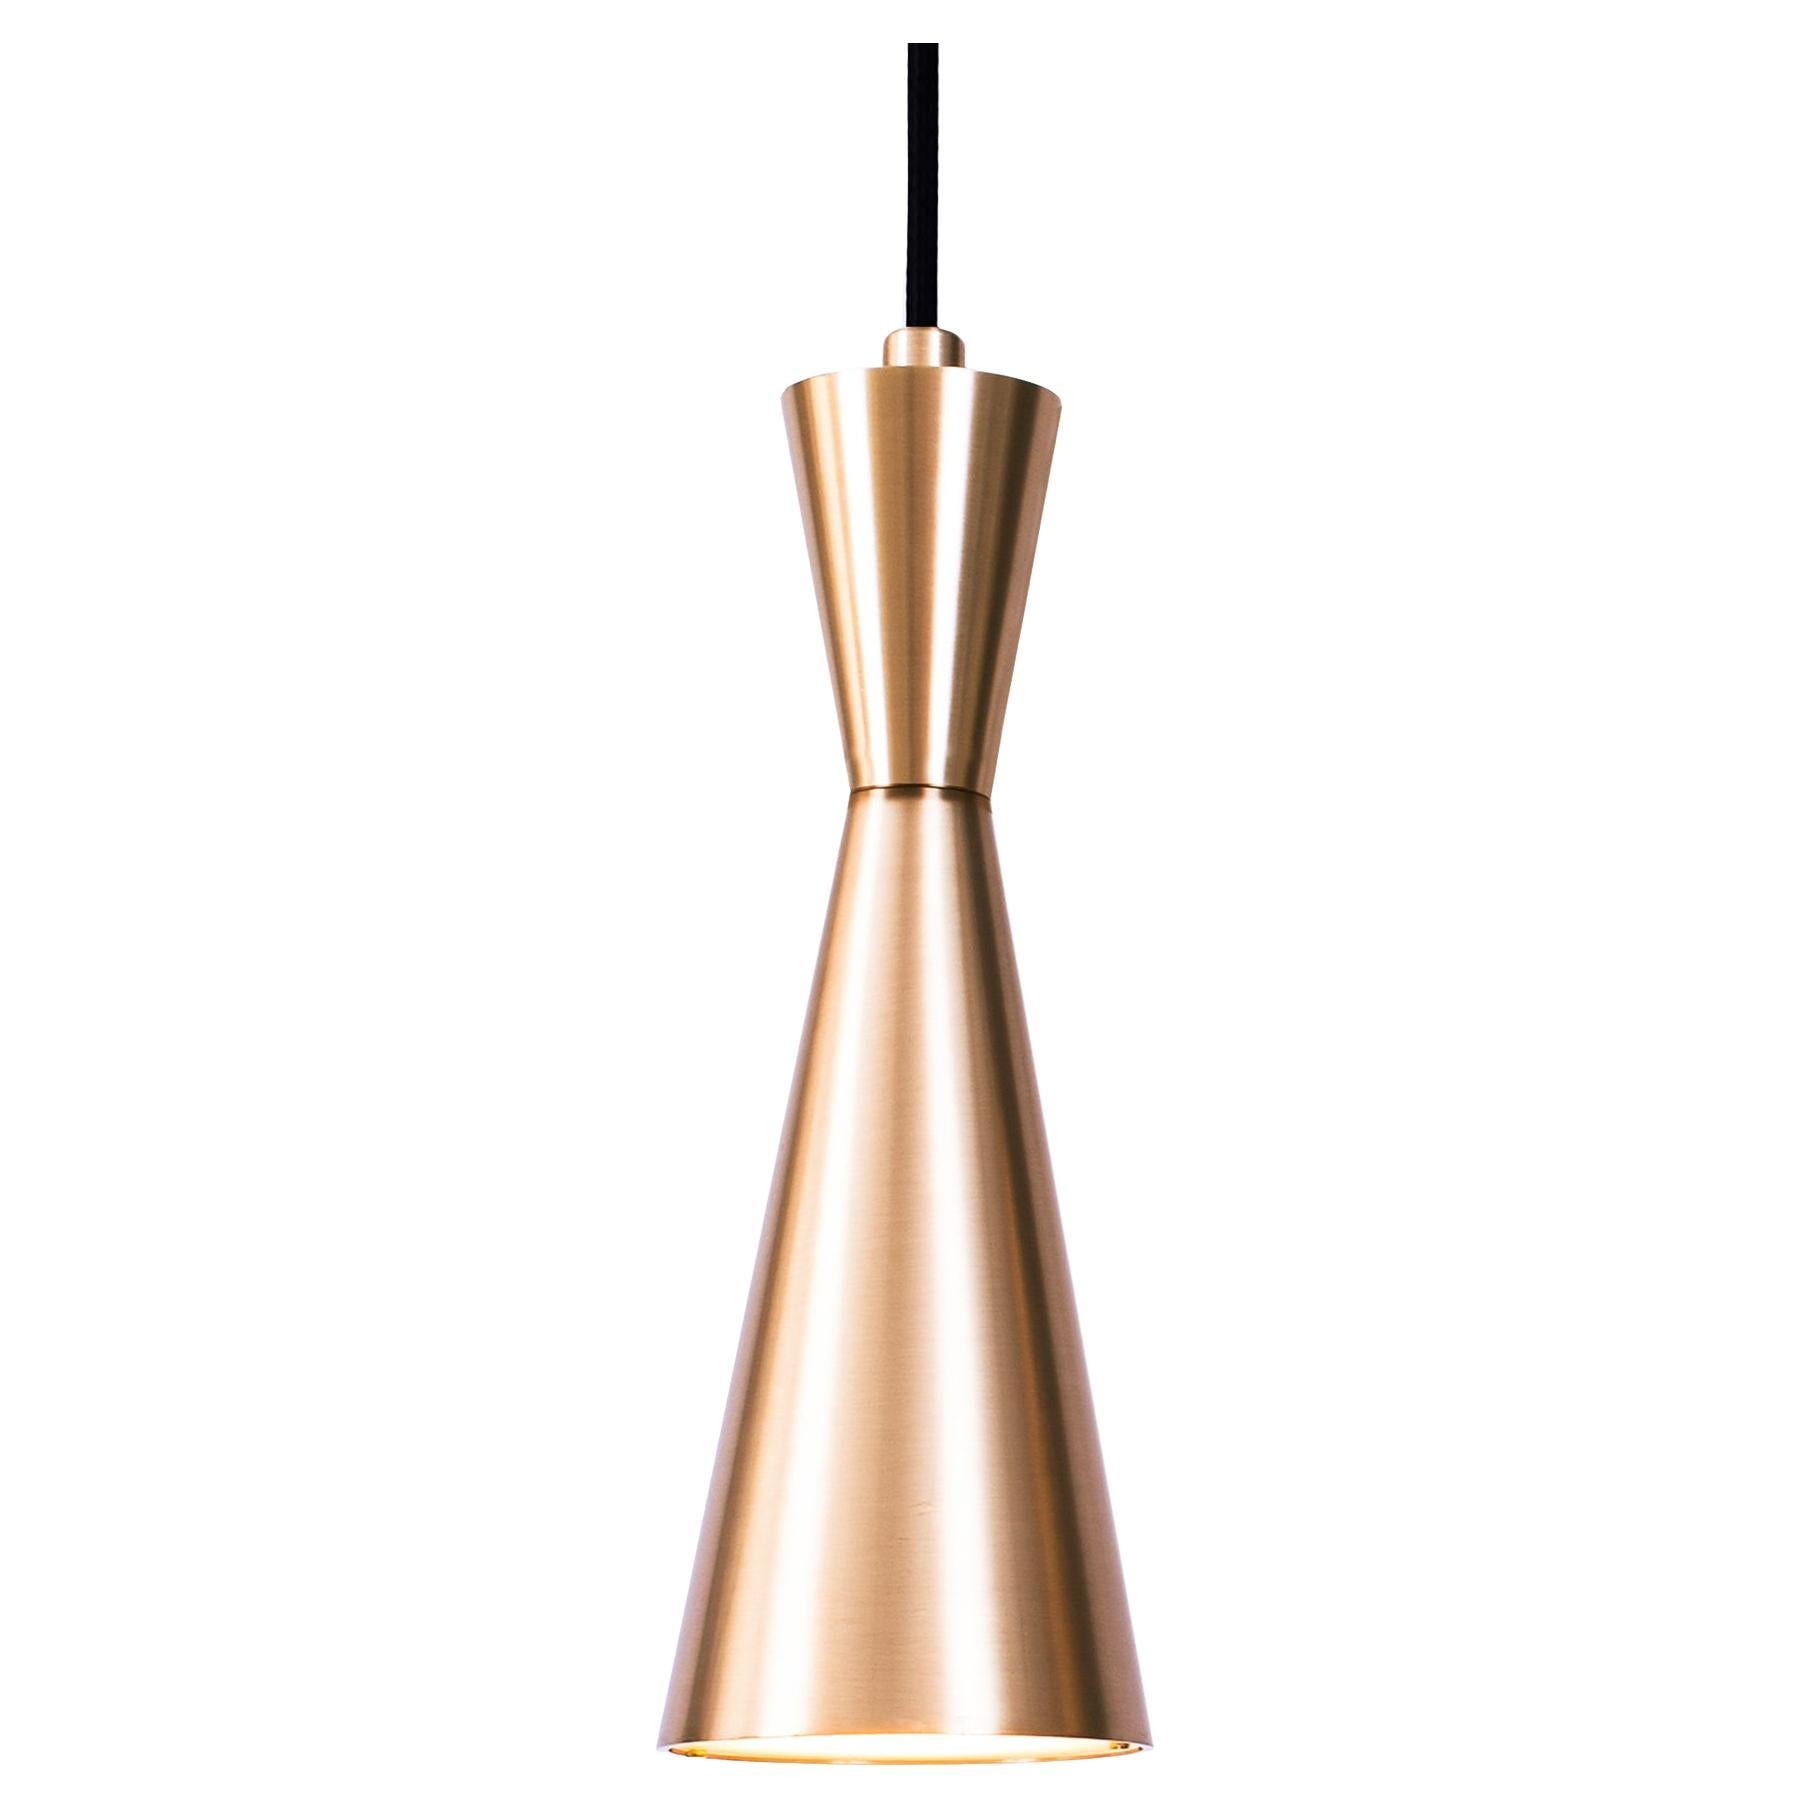 Cone Pendant Lamp, Large by Marc Wood, Handmade Brass Lamp with GU10 LED Bulb For Sale